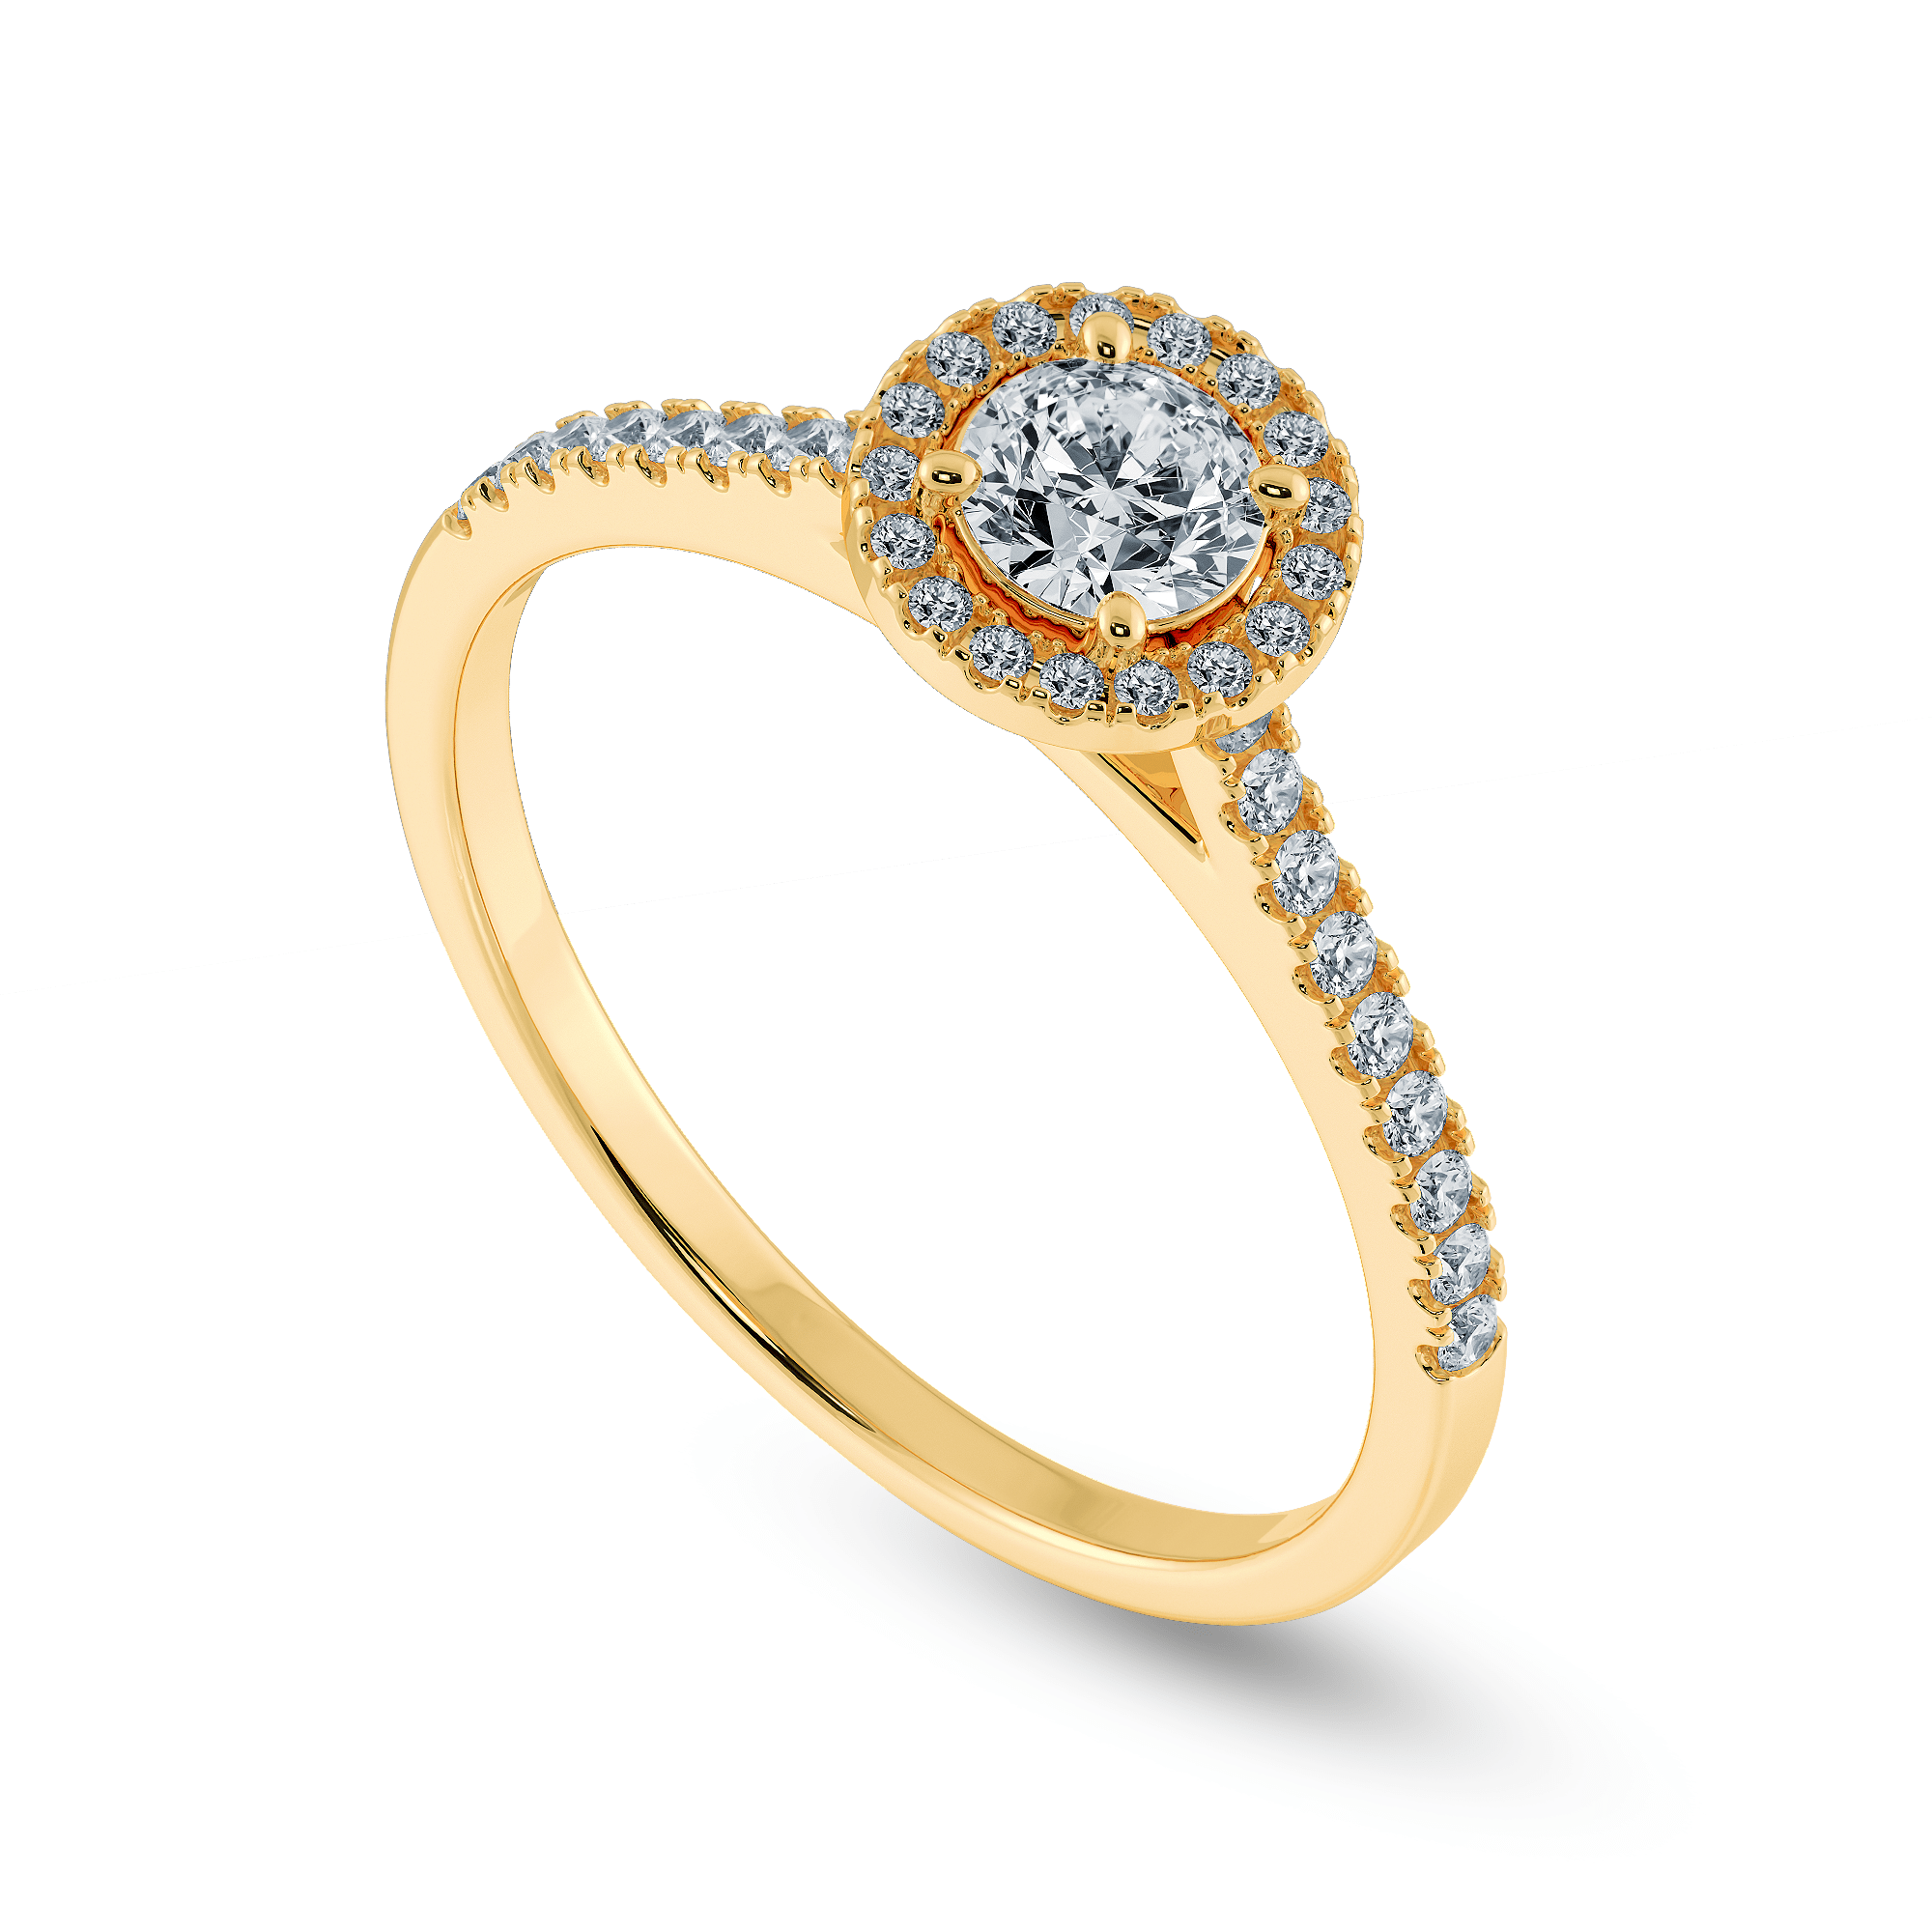 Get the Perfect 18k Yellow Gold Engagement Rings | GLAMIRA.in